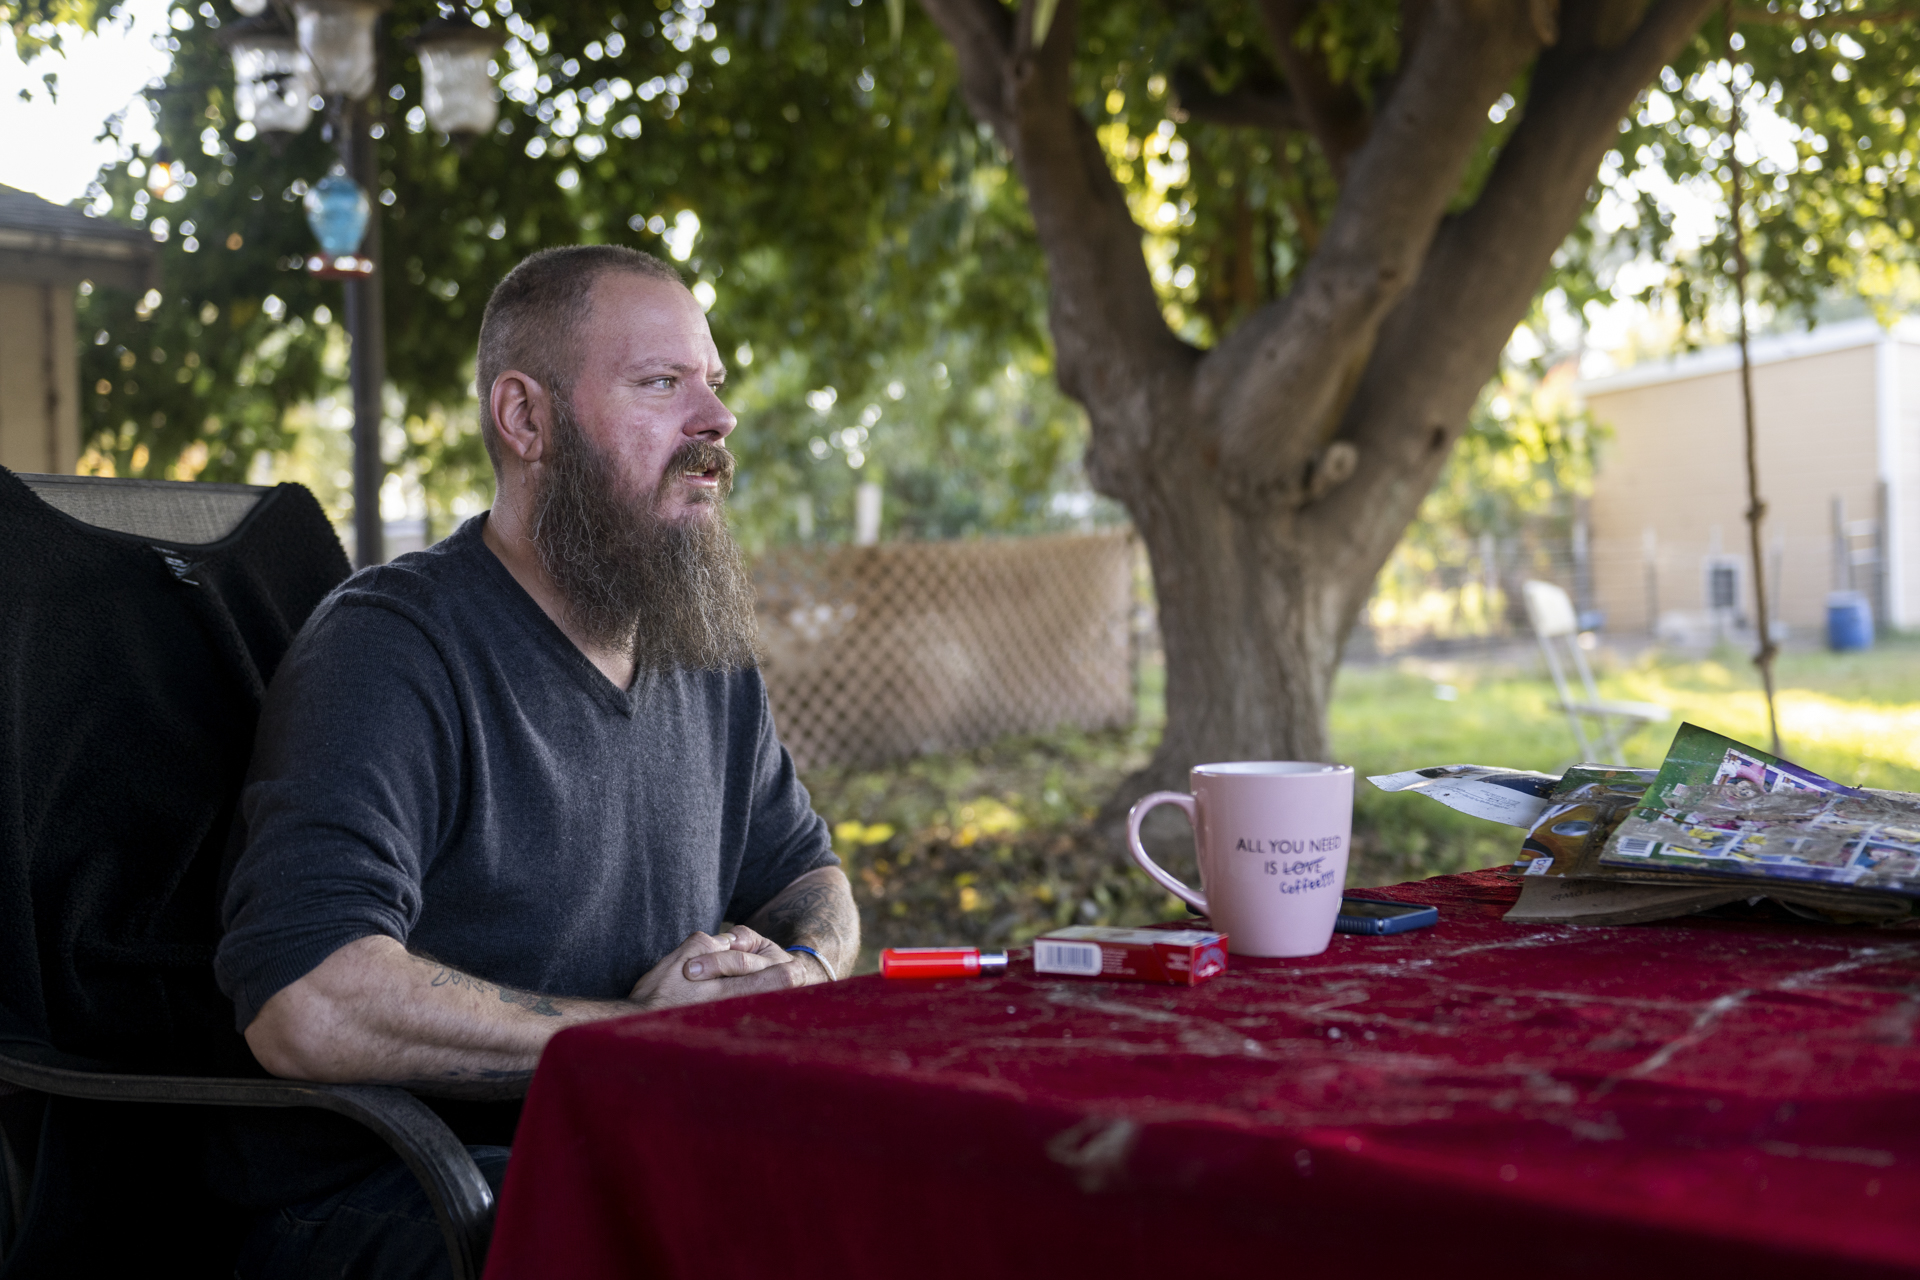 A white man with a long beard sits outdoors in the shade of a tree, at a table with a red table cloth. On the table in front of him are a pack of cigarettes, a lighter, a white mug, a cellphone, and a short stack of papers.